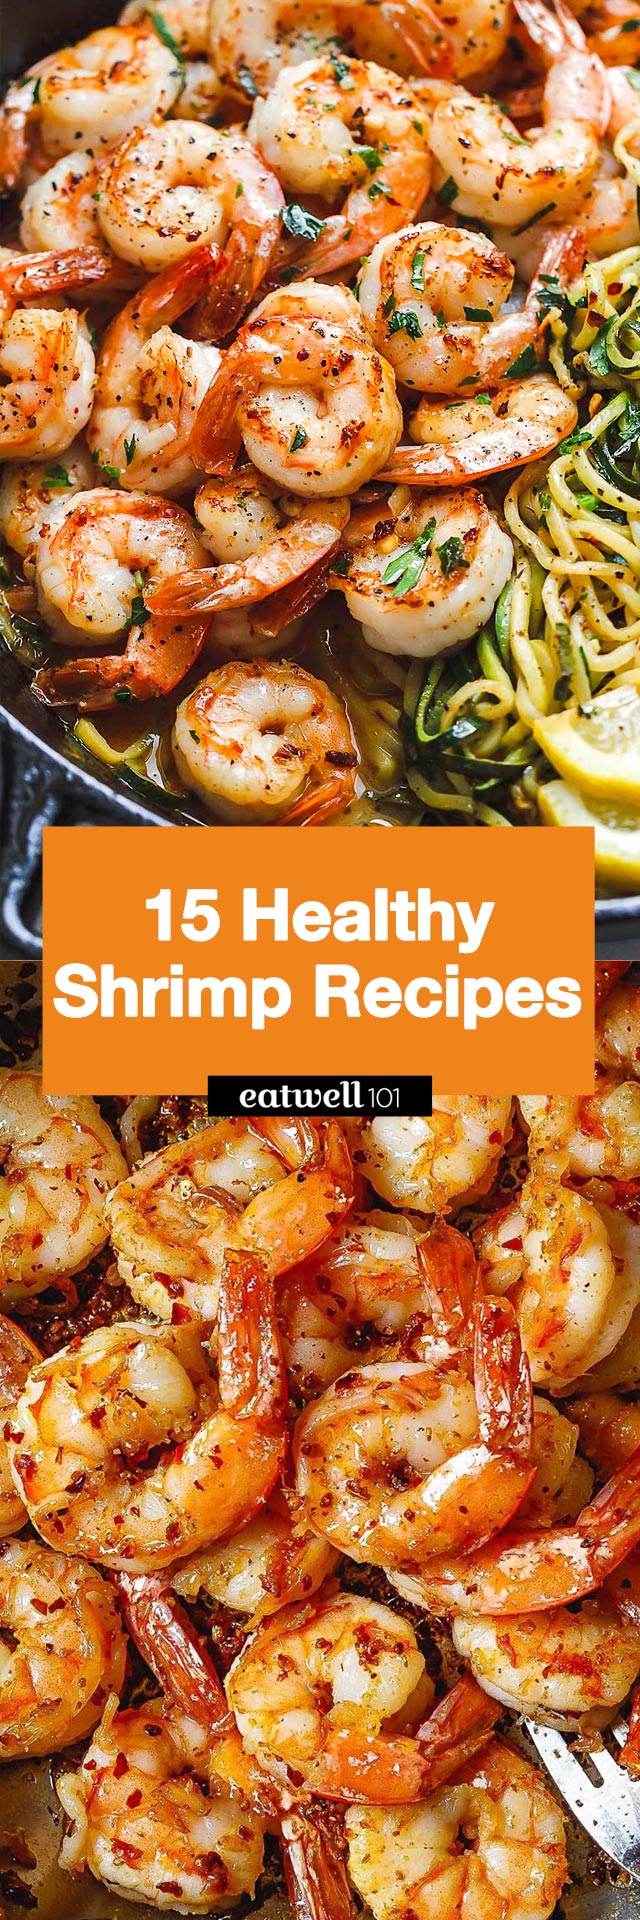 15 Healthy Shrimp Recipes We Can't Stop Making - #healthy #shrimp #recipe - These healthy shrimp recipes will help you out if you're trying to eat clean!